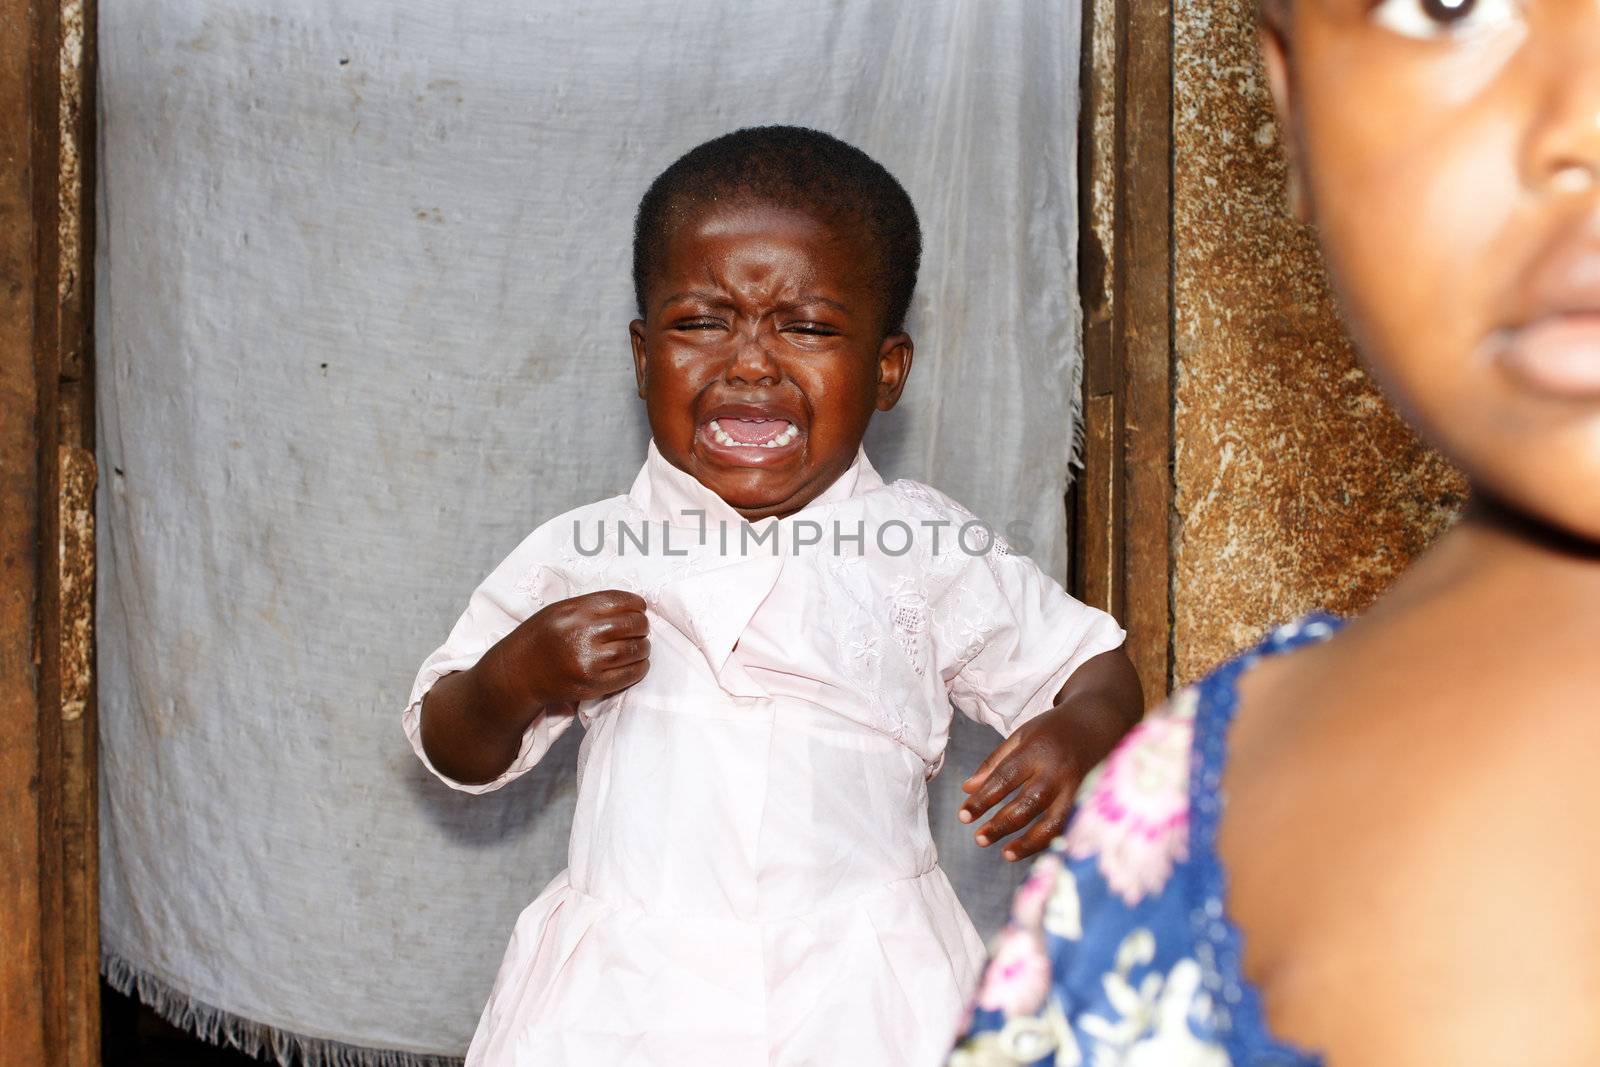 Crying African toddler with sister in foreground by Mirage3